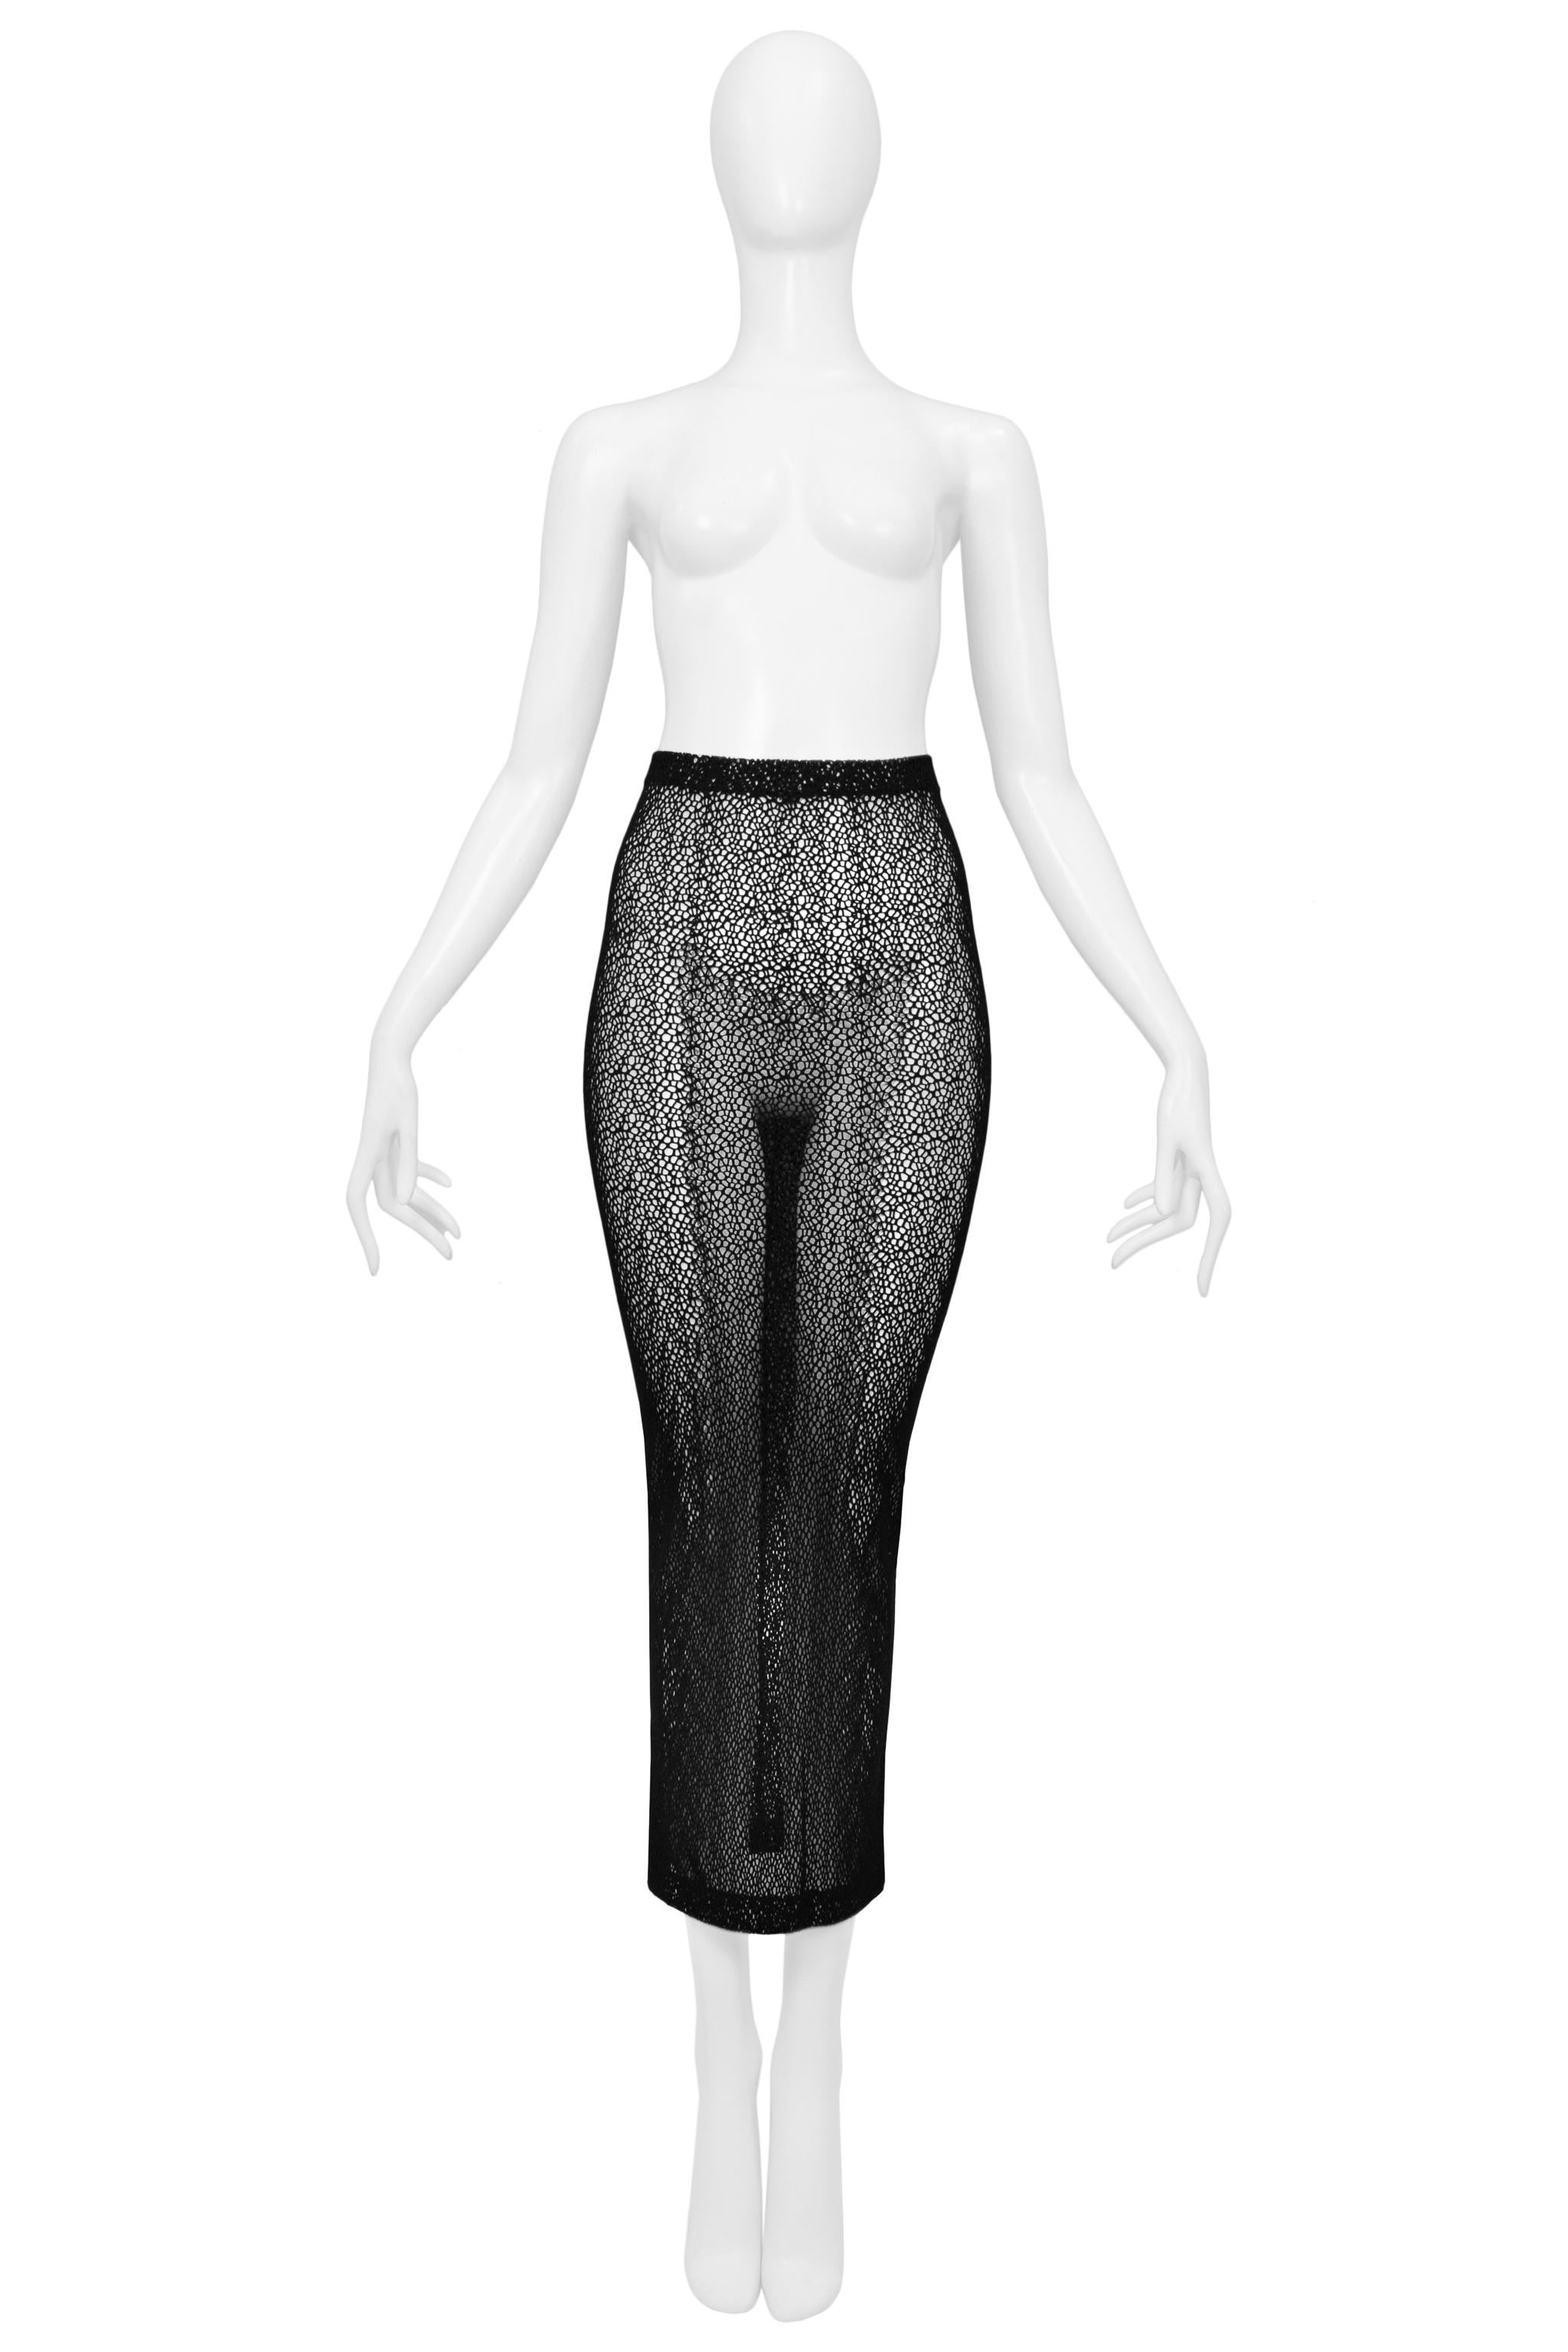 Resurrection Vintage is excited to present a vintage Romeo Gigli black midi skirt featuring mesh net fabric and elastic waist.

Romeo Gigli
Unmarked Small
Poly Stretch
Excellent Vintage Condition 
Authenticity Guaranteed 